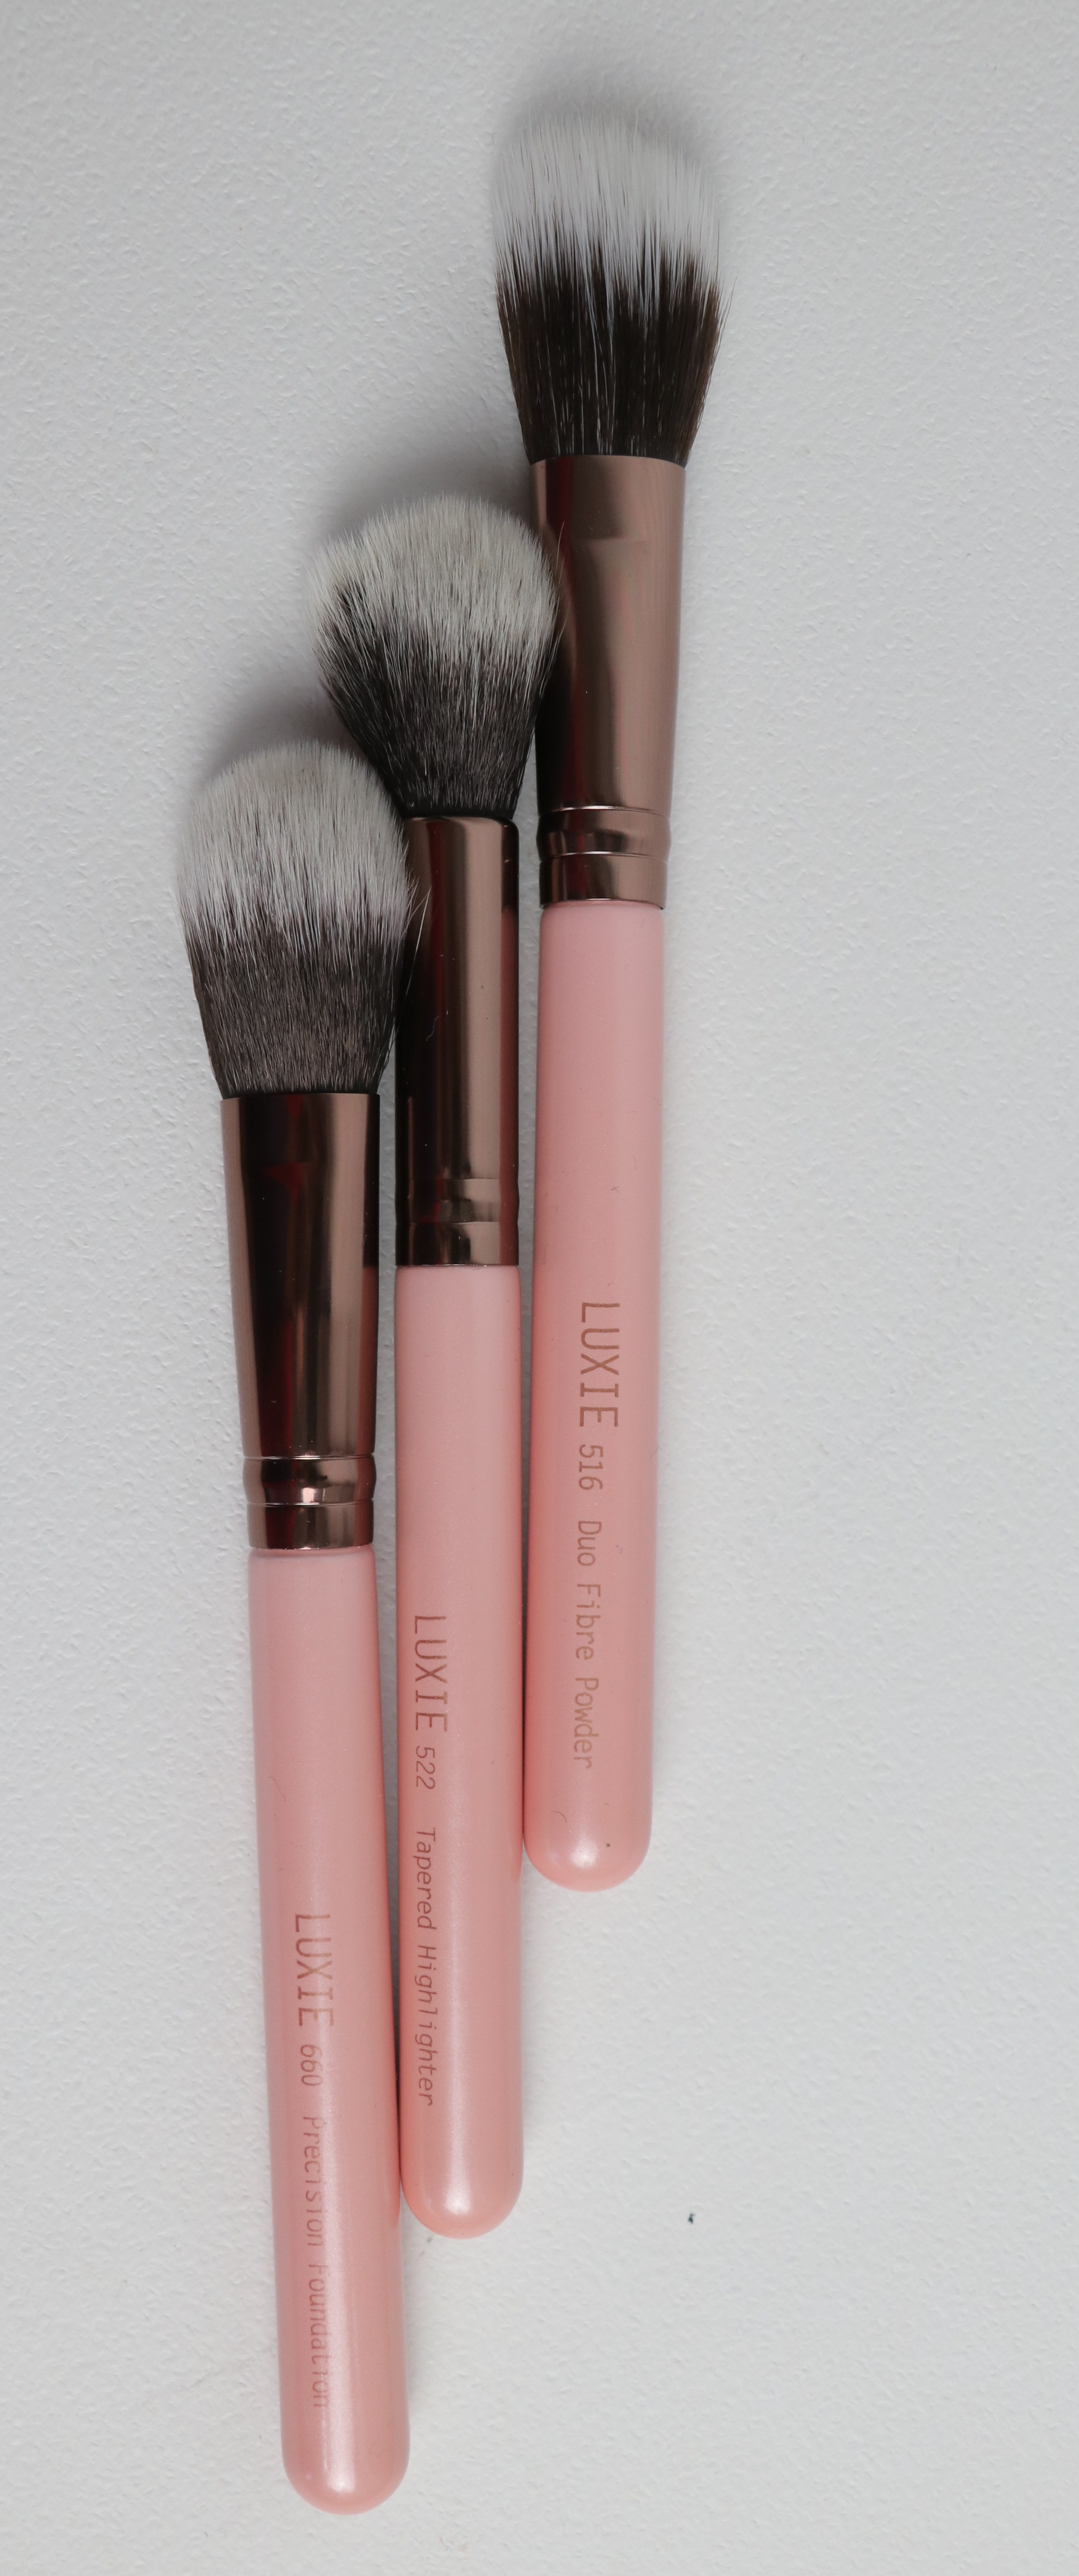 Boxycharm June 2018 - Luxie 3 Piece Flawless Complexion Brushes